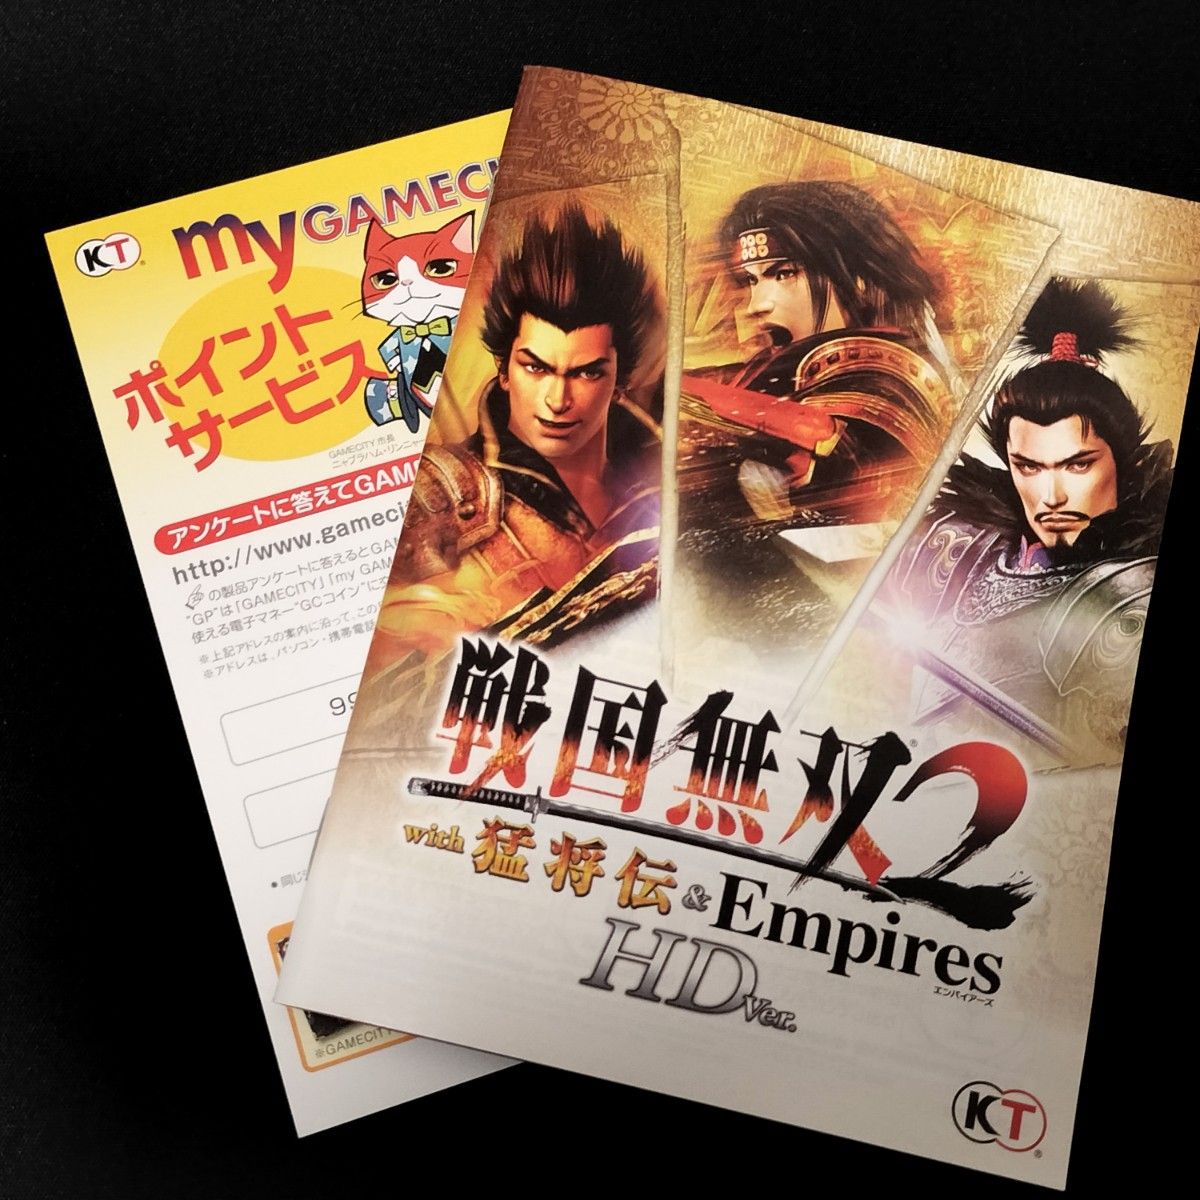 【PS3ソフト】戦国無双2 with 猛将伝＆ Empires HD Version